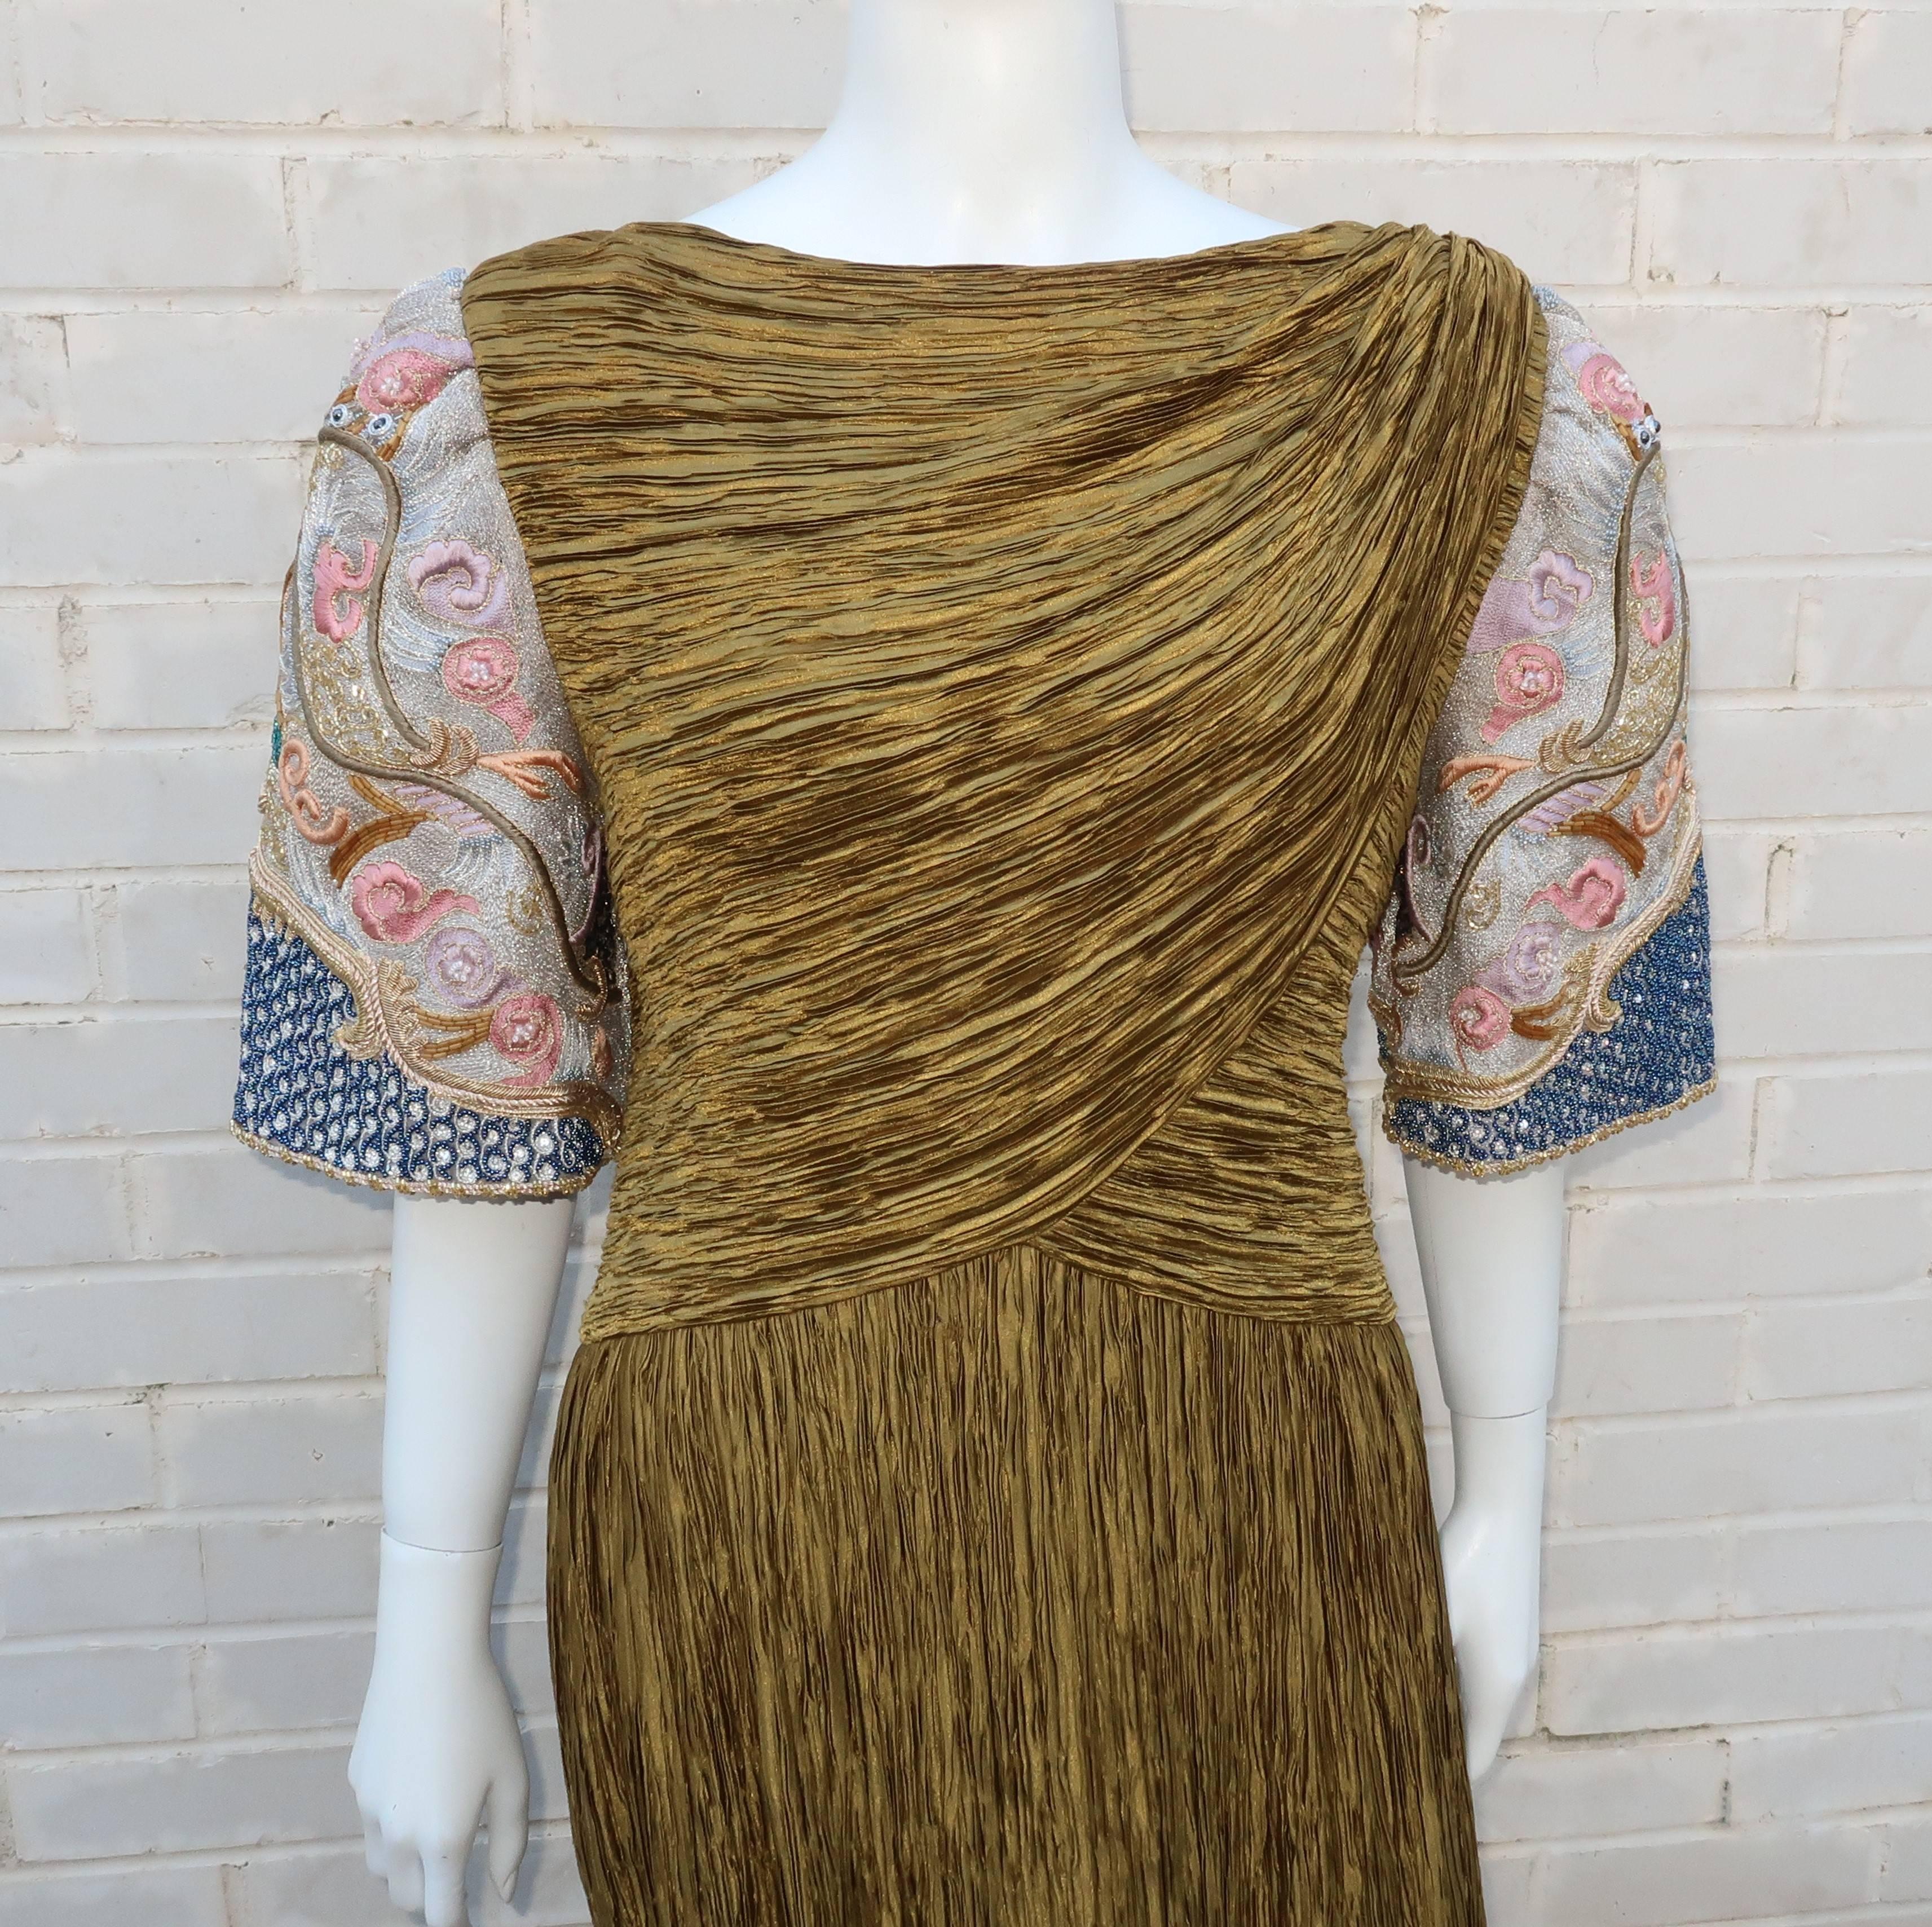 The crowd will part when you make an entrance in this stunning Mary McFadden Couture evening dress.  This lovely dress incorporates Mary McFadden's signature exotic style and micro pleated fabric similar to the designs of Mario Fortuny.  The olive